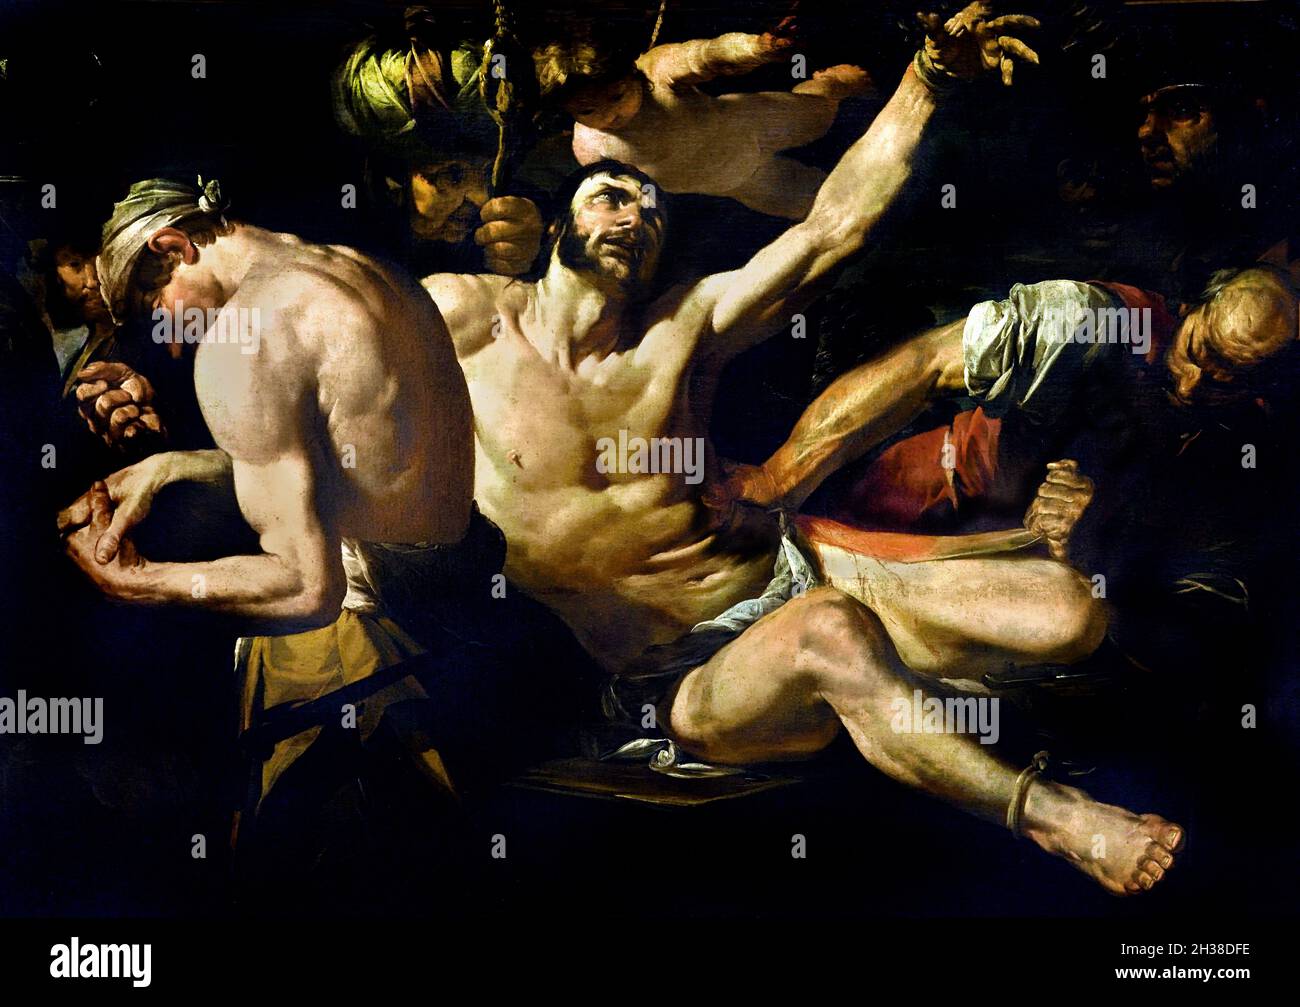 Martyrdom of St Bartholomeus circa 1649 by Gioacchino Assereto  1600-1649  Italy, Italian, ( Bartholomew was one of the twelve apostles of Jesus according to the New Testament. He is said to have been martyred for having converted Polymius, King of Armenia, to Christianity.) Stock Photo